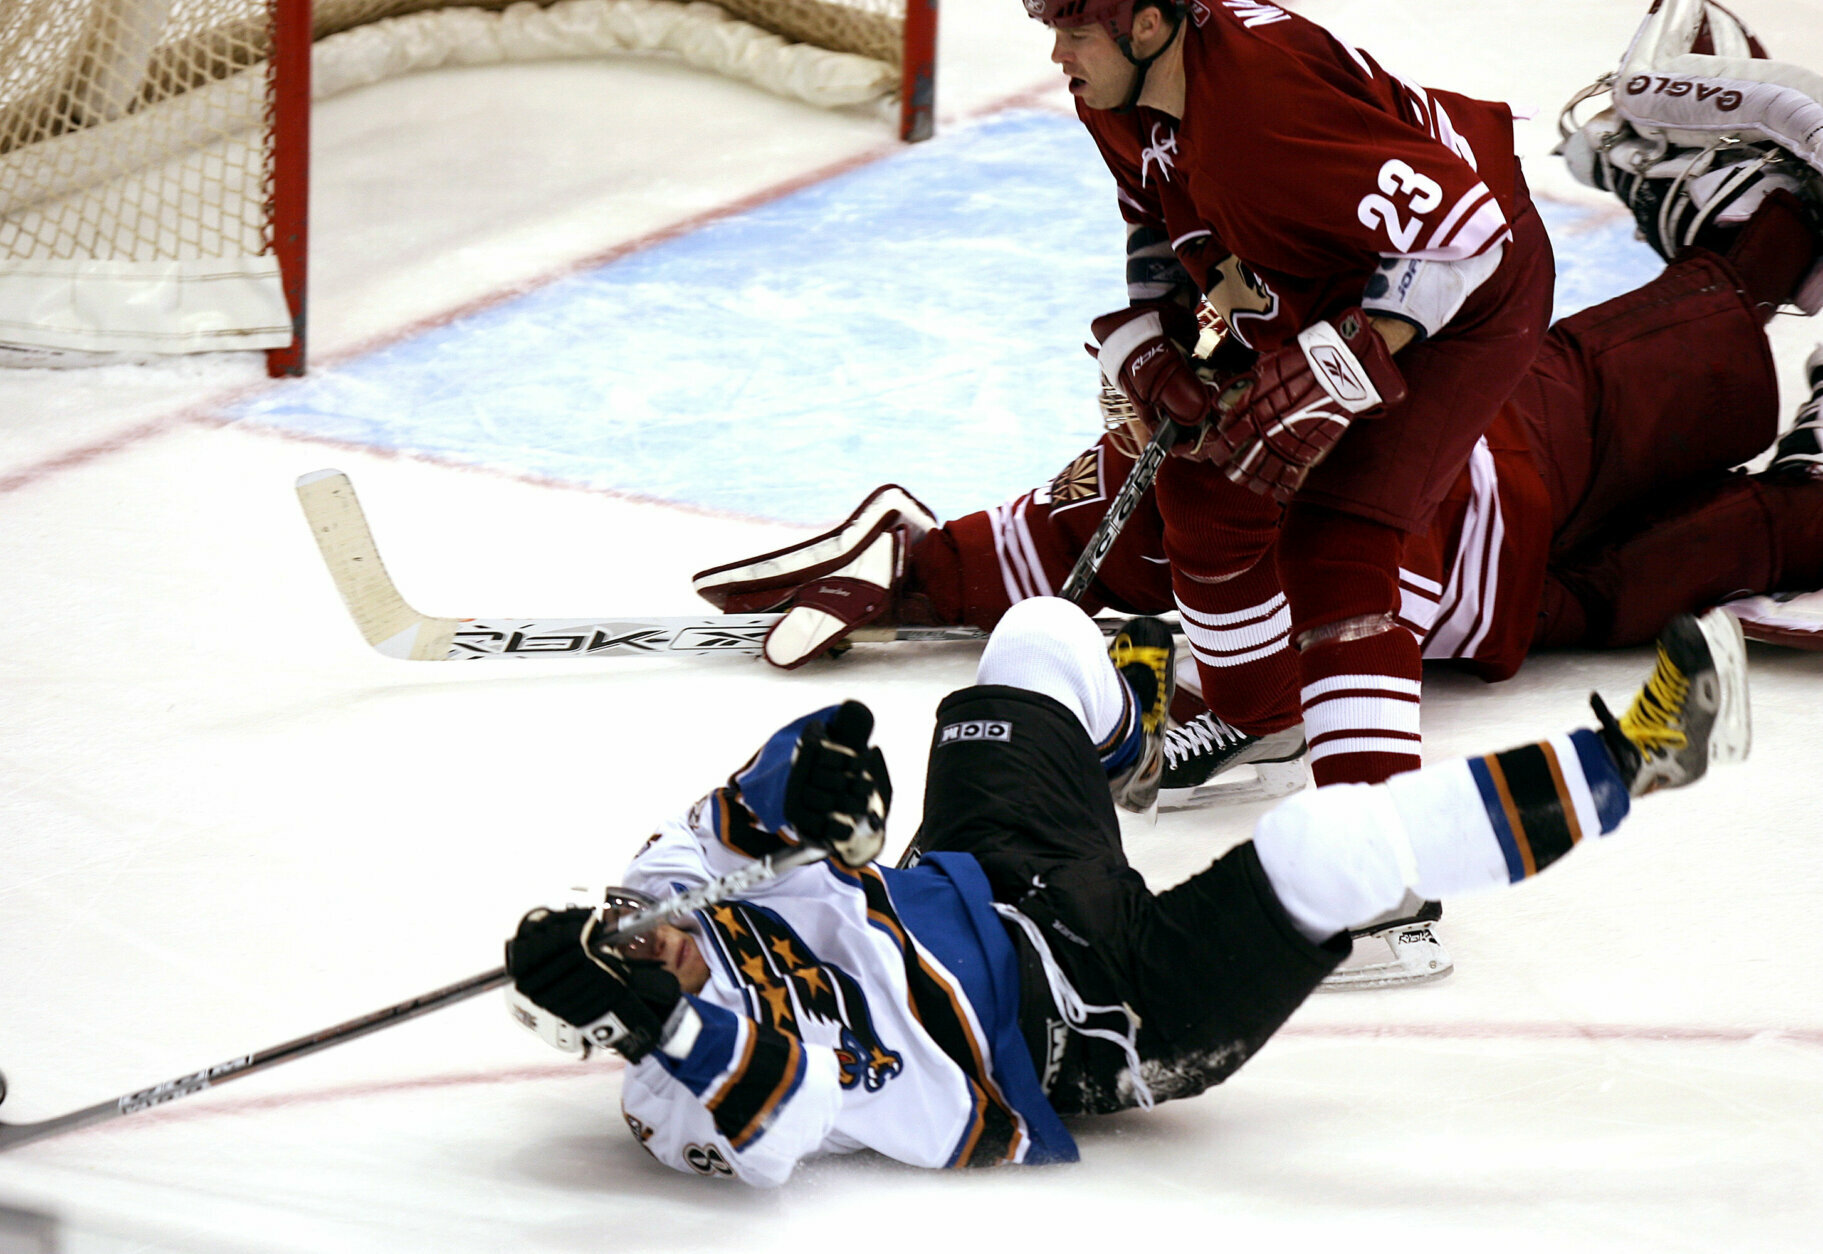 <p>On Jan. 16, 2006, Ovechkin shot the puck from over his head after being checked to the ice by Phoenix Coyotes defenseman Paul Mara. Caps fans today remember the acrobatic score simply as &#8220;The Goal.&#8221;</p>
